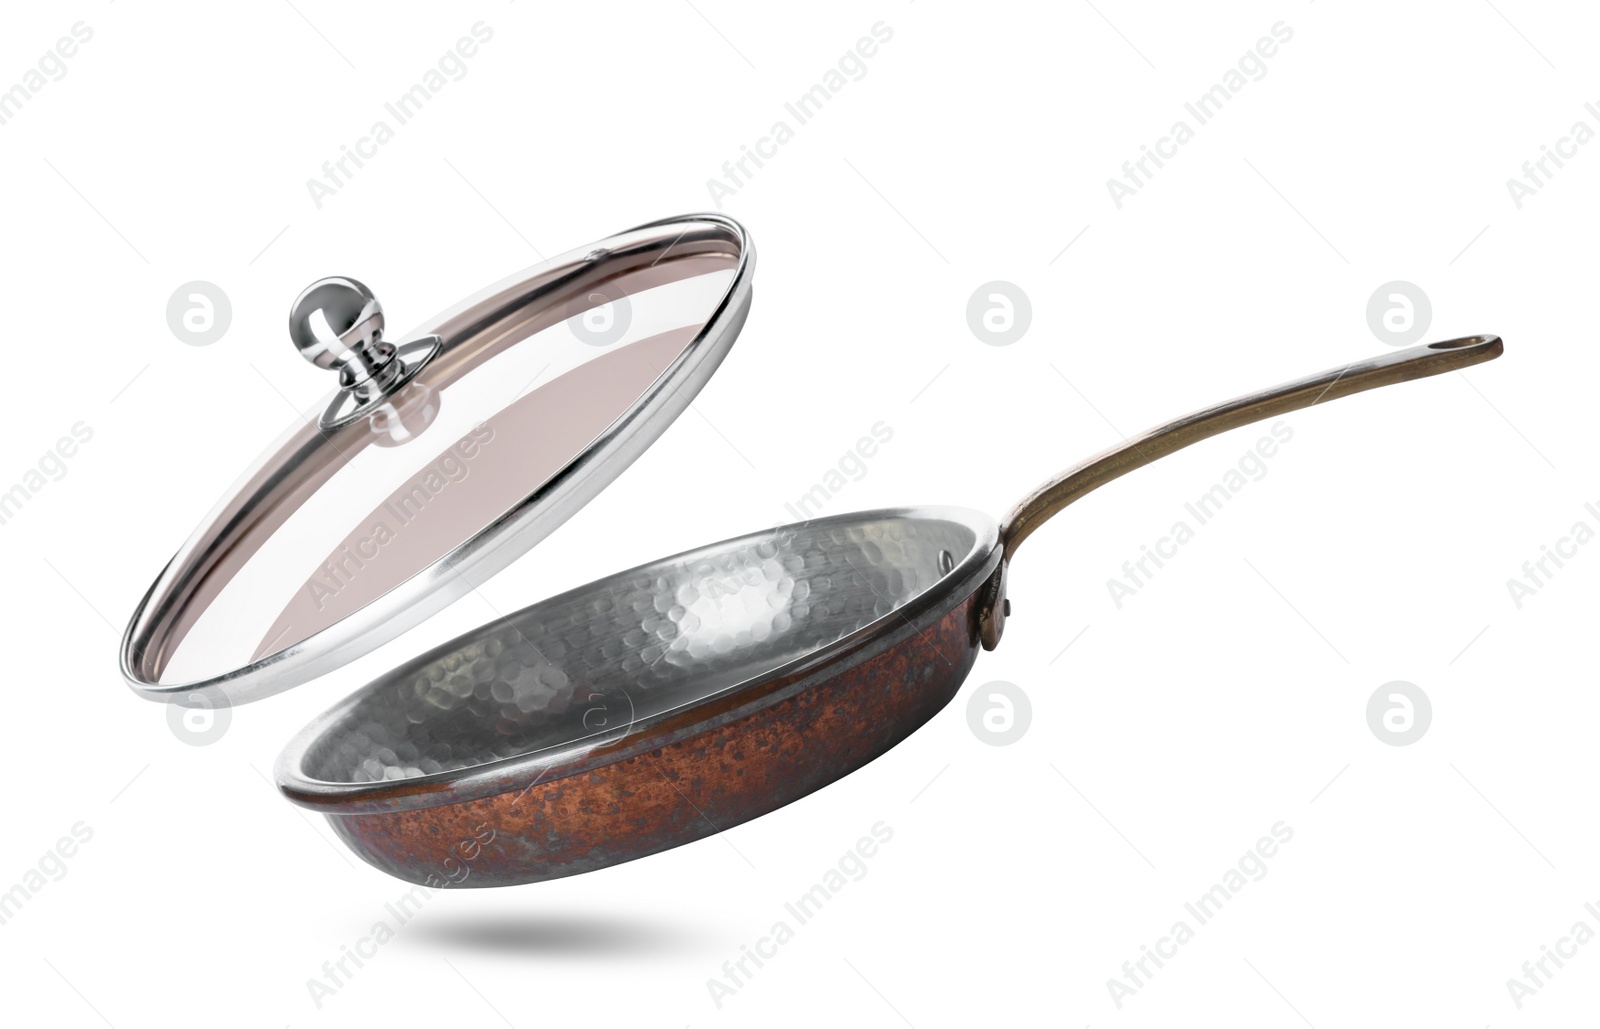 Image of New frying pan and glass lid on white background